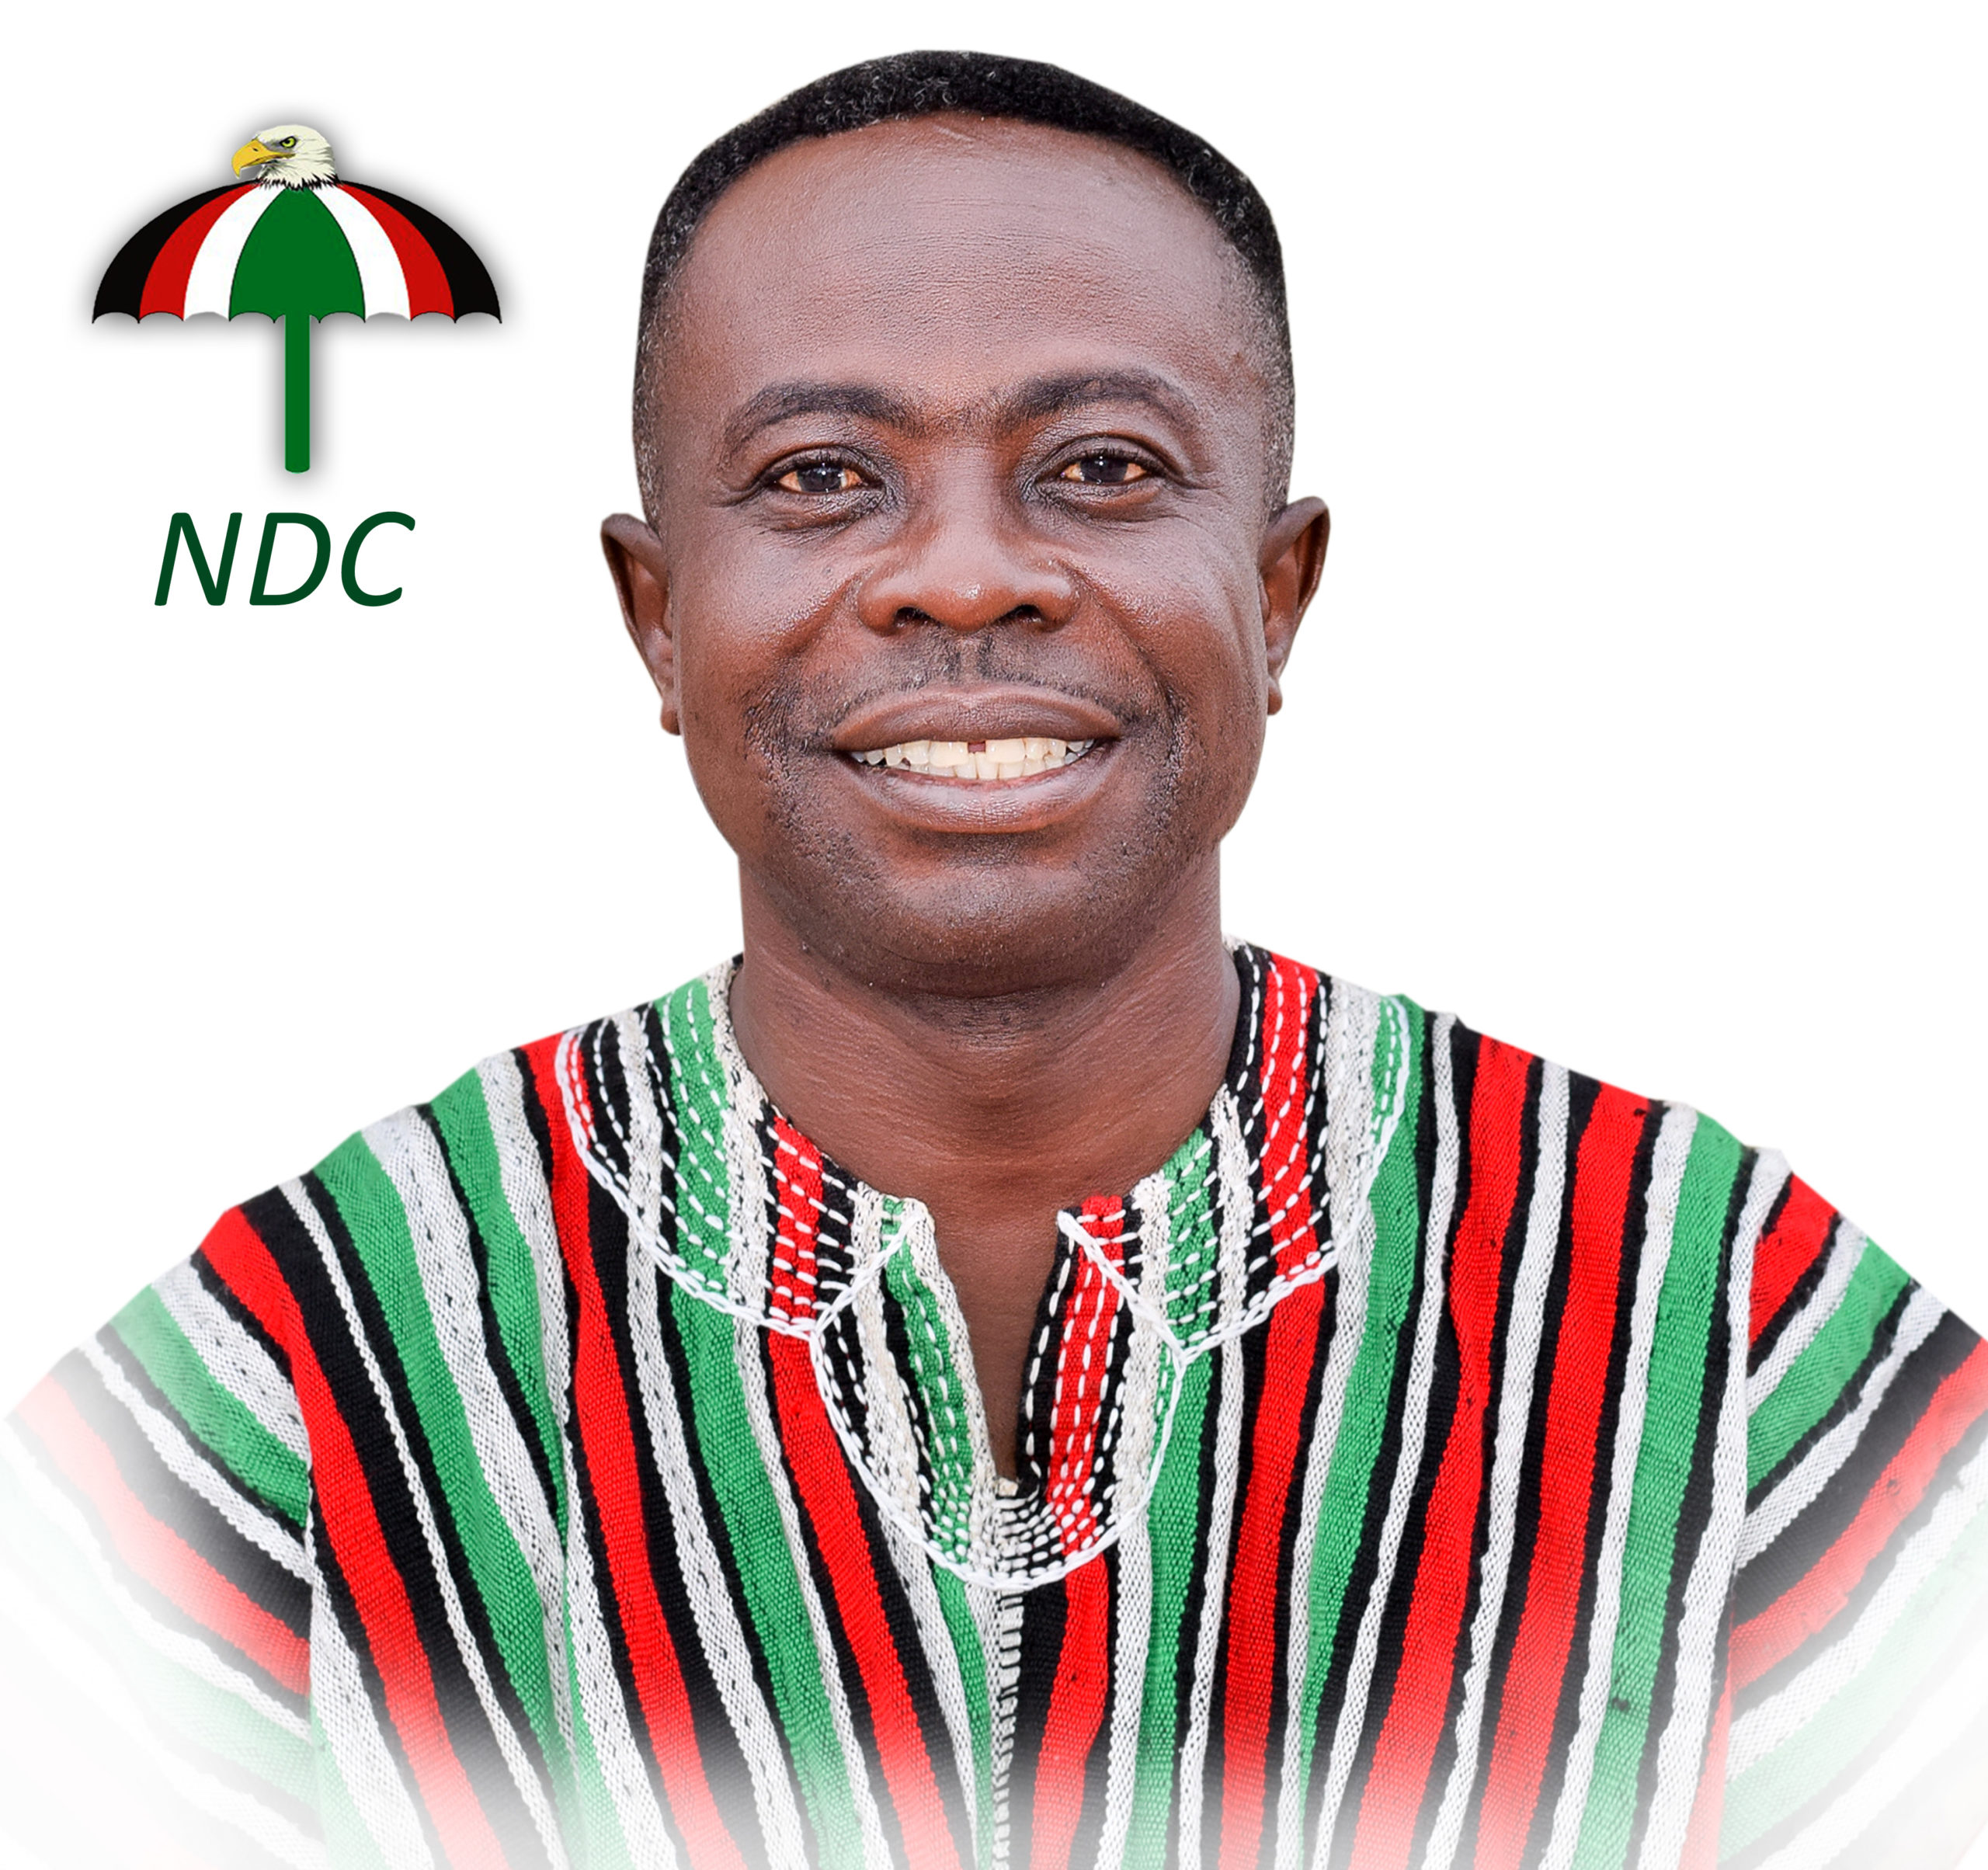  Aowin Constituency :NDC Parliamentary Candidate  Fights Coronavirus With Hygienic Materials